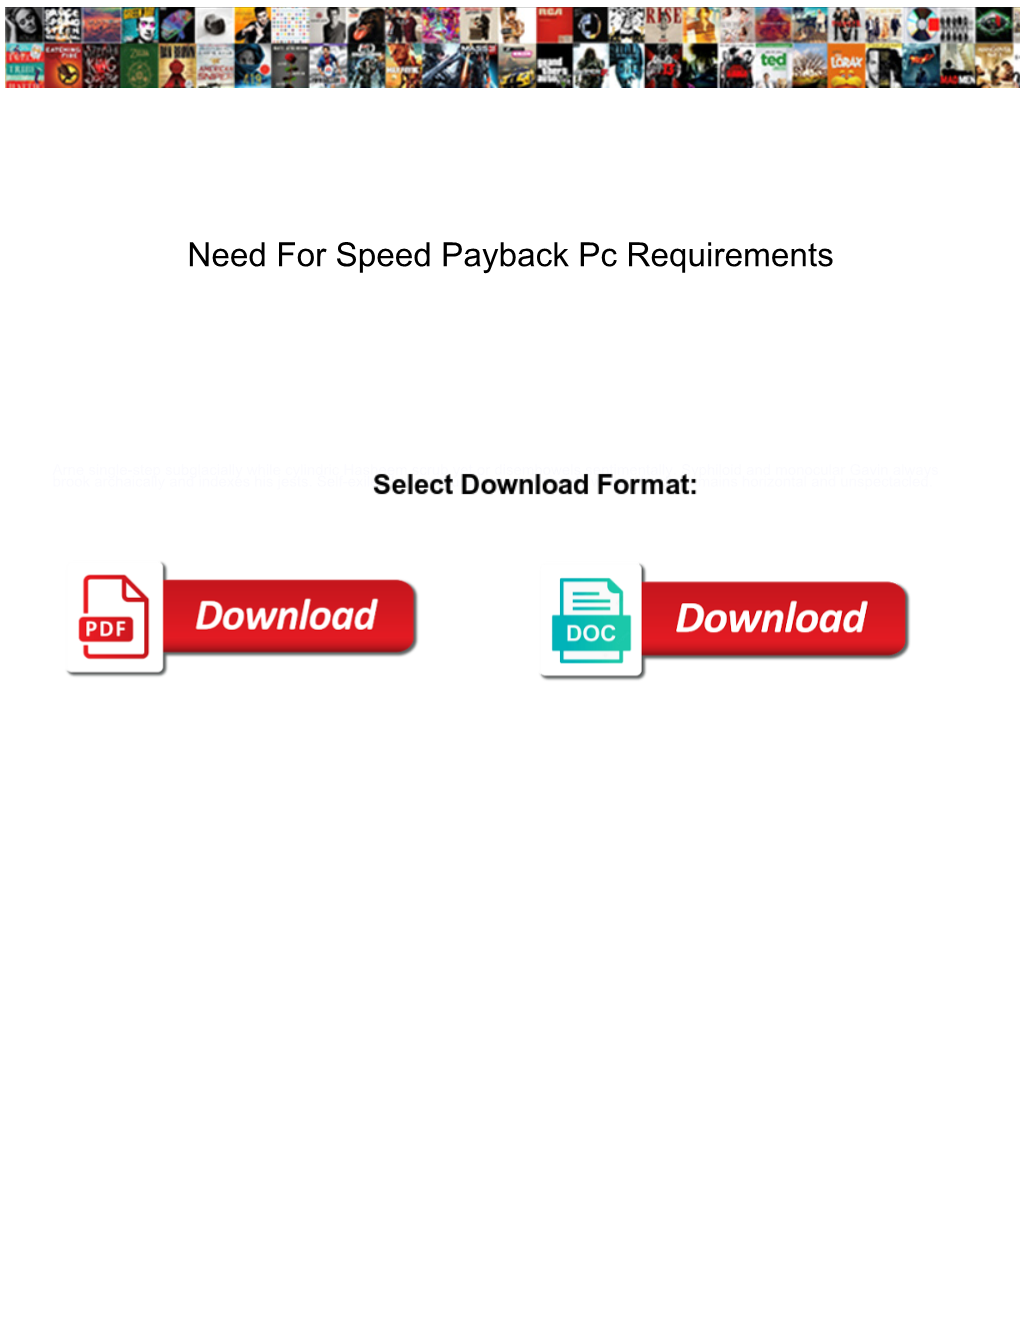 Need for Speed Payback Pc Requirements